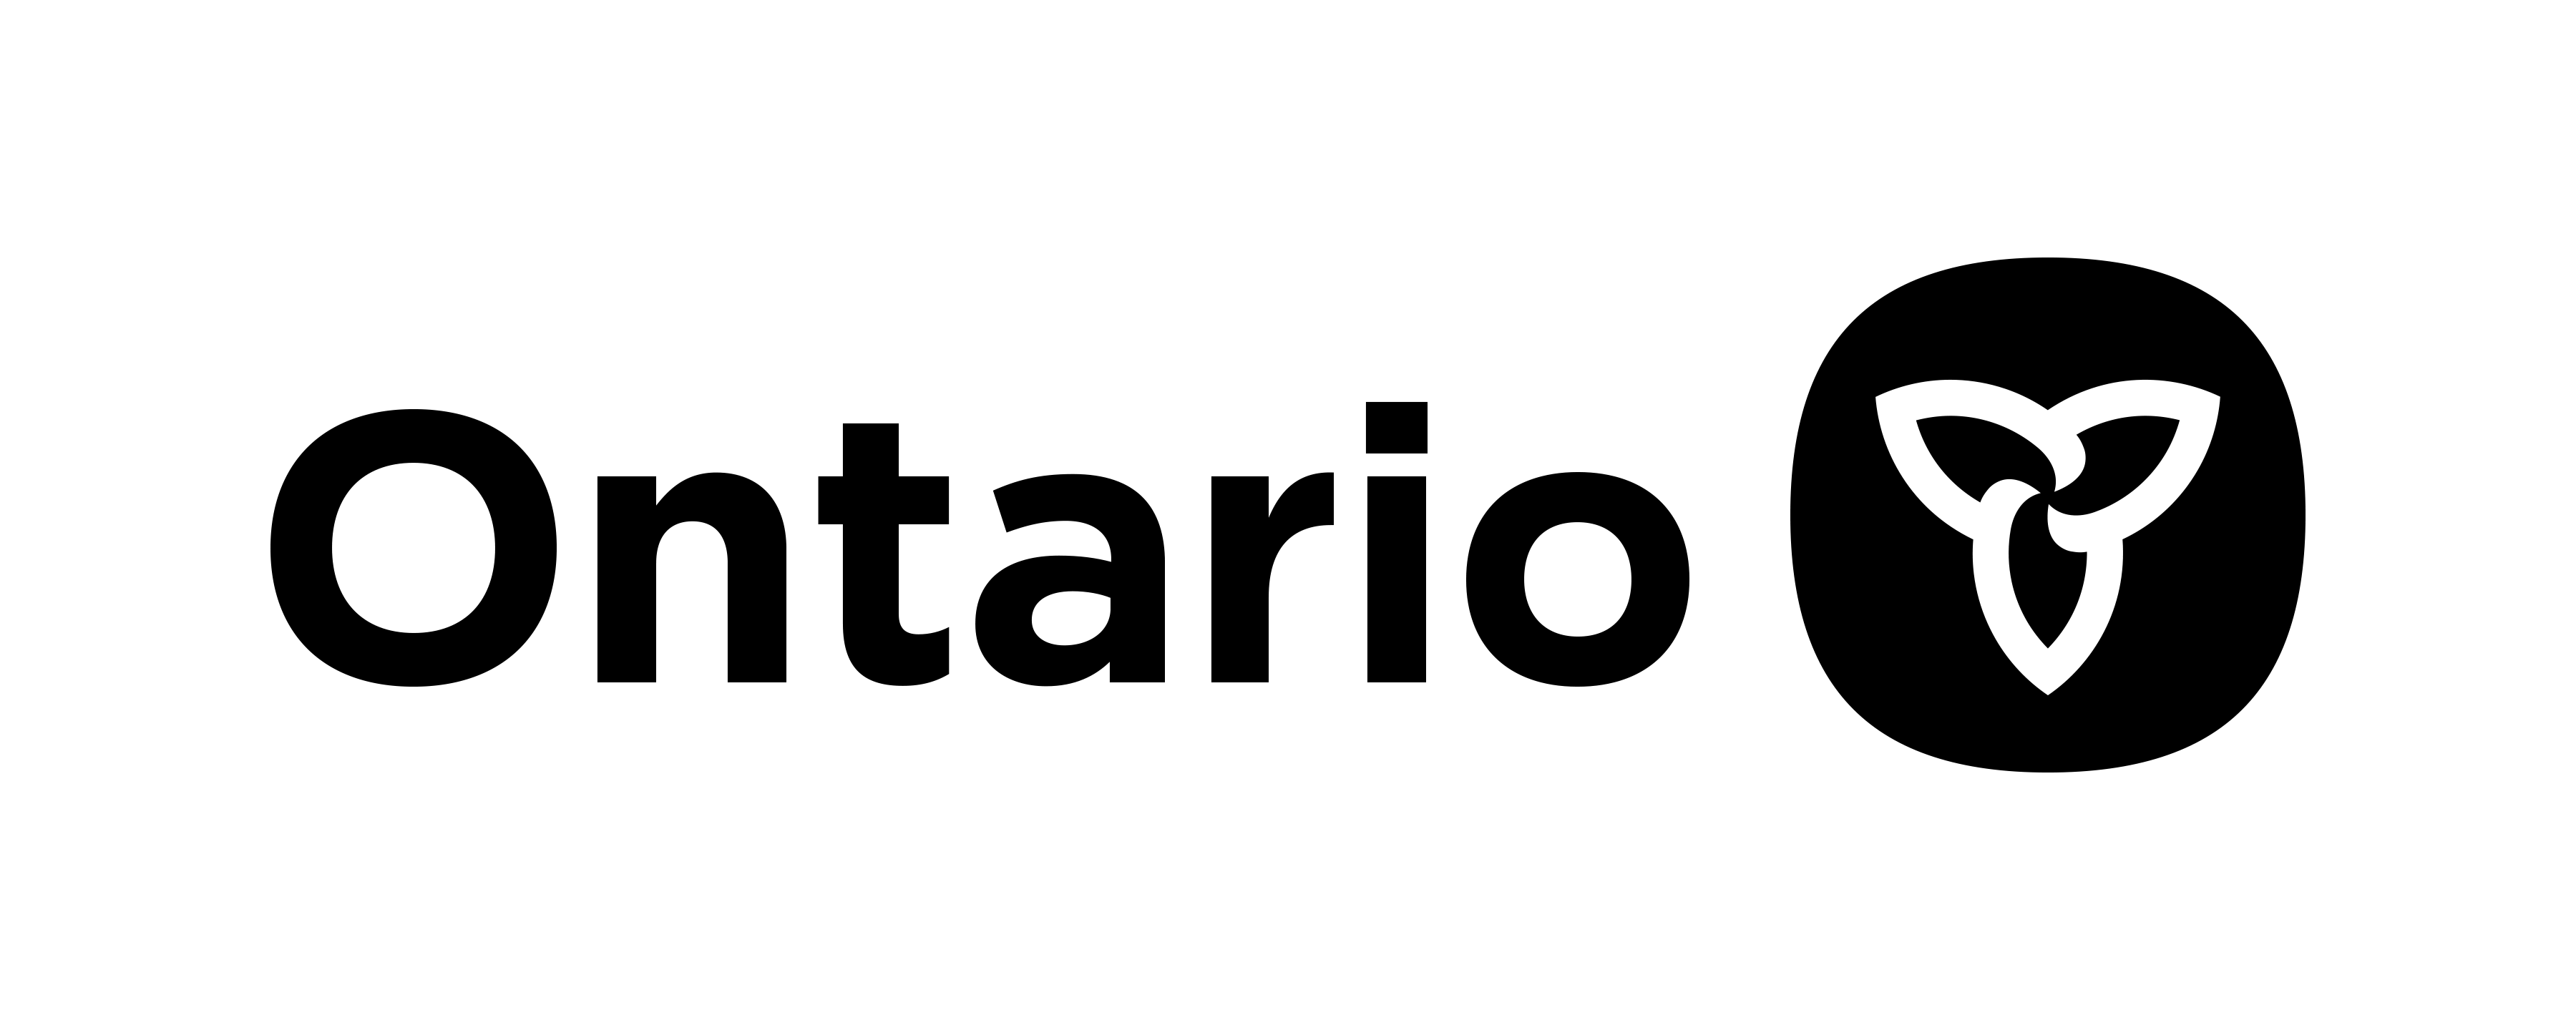 Government of Ontario logo and symbol